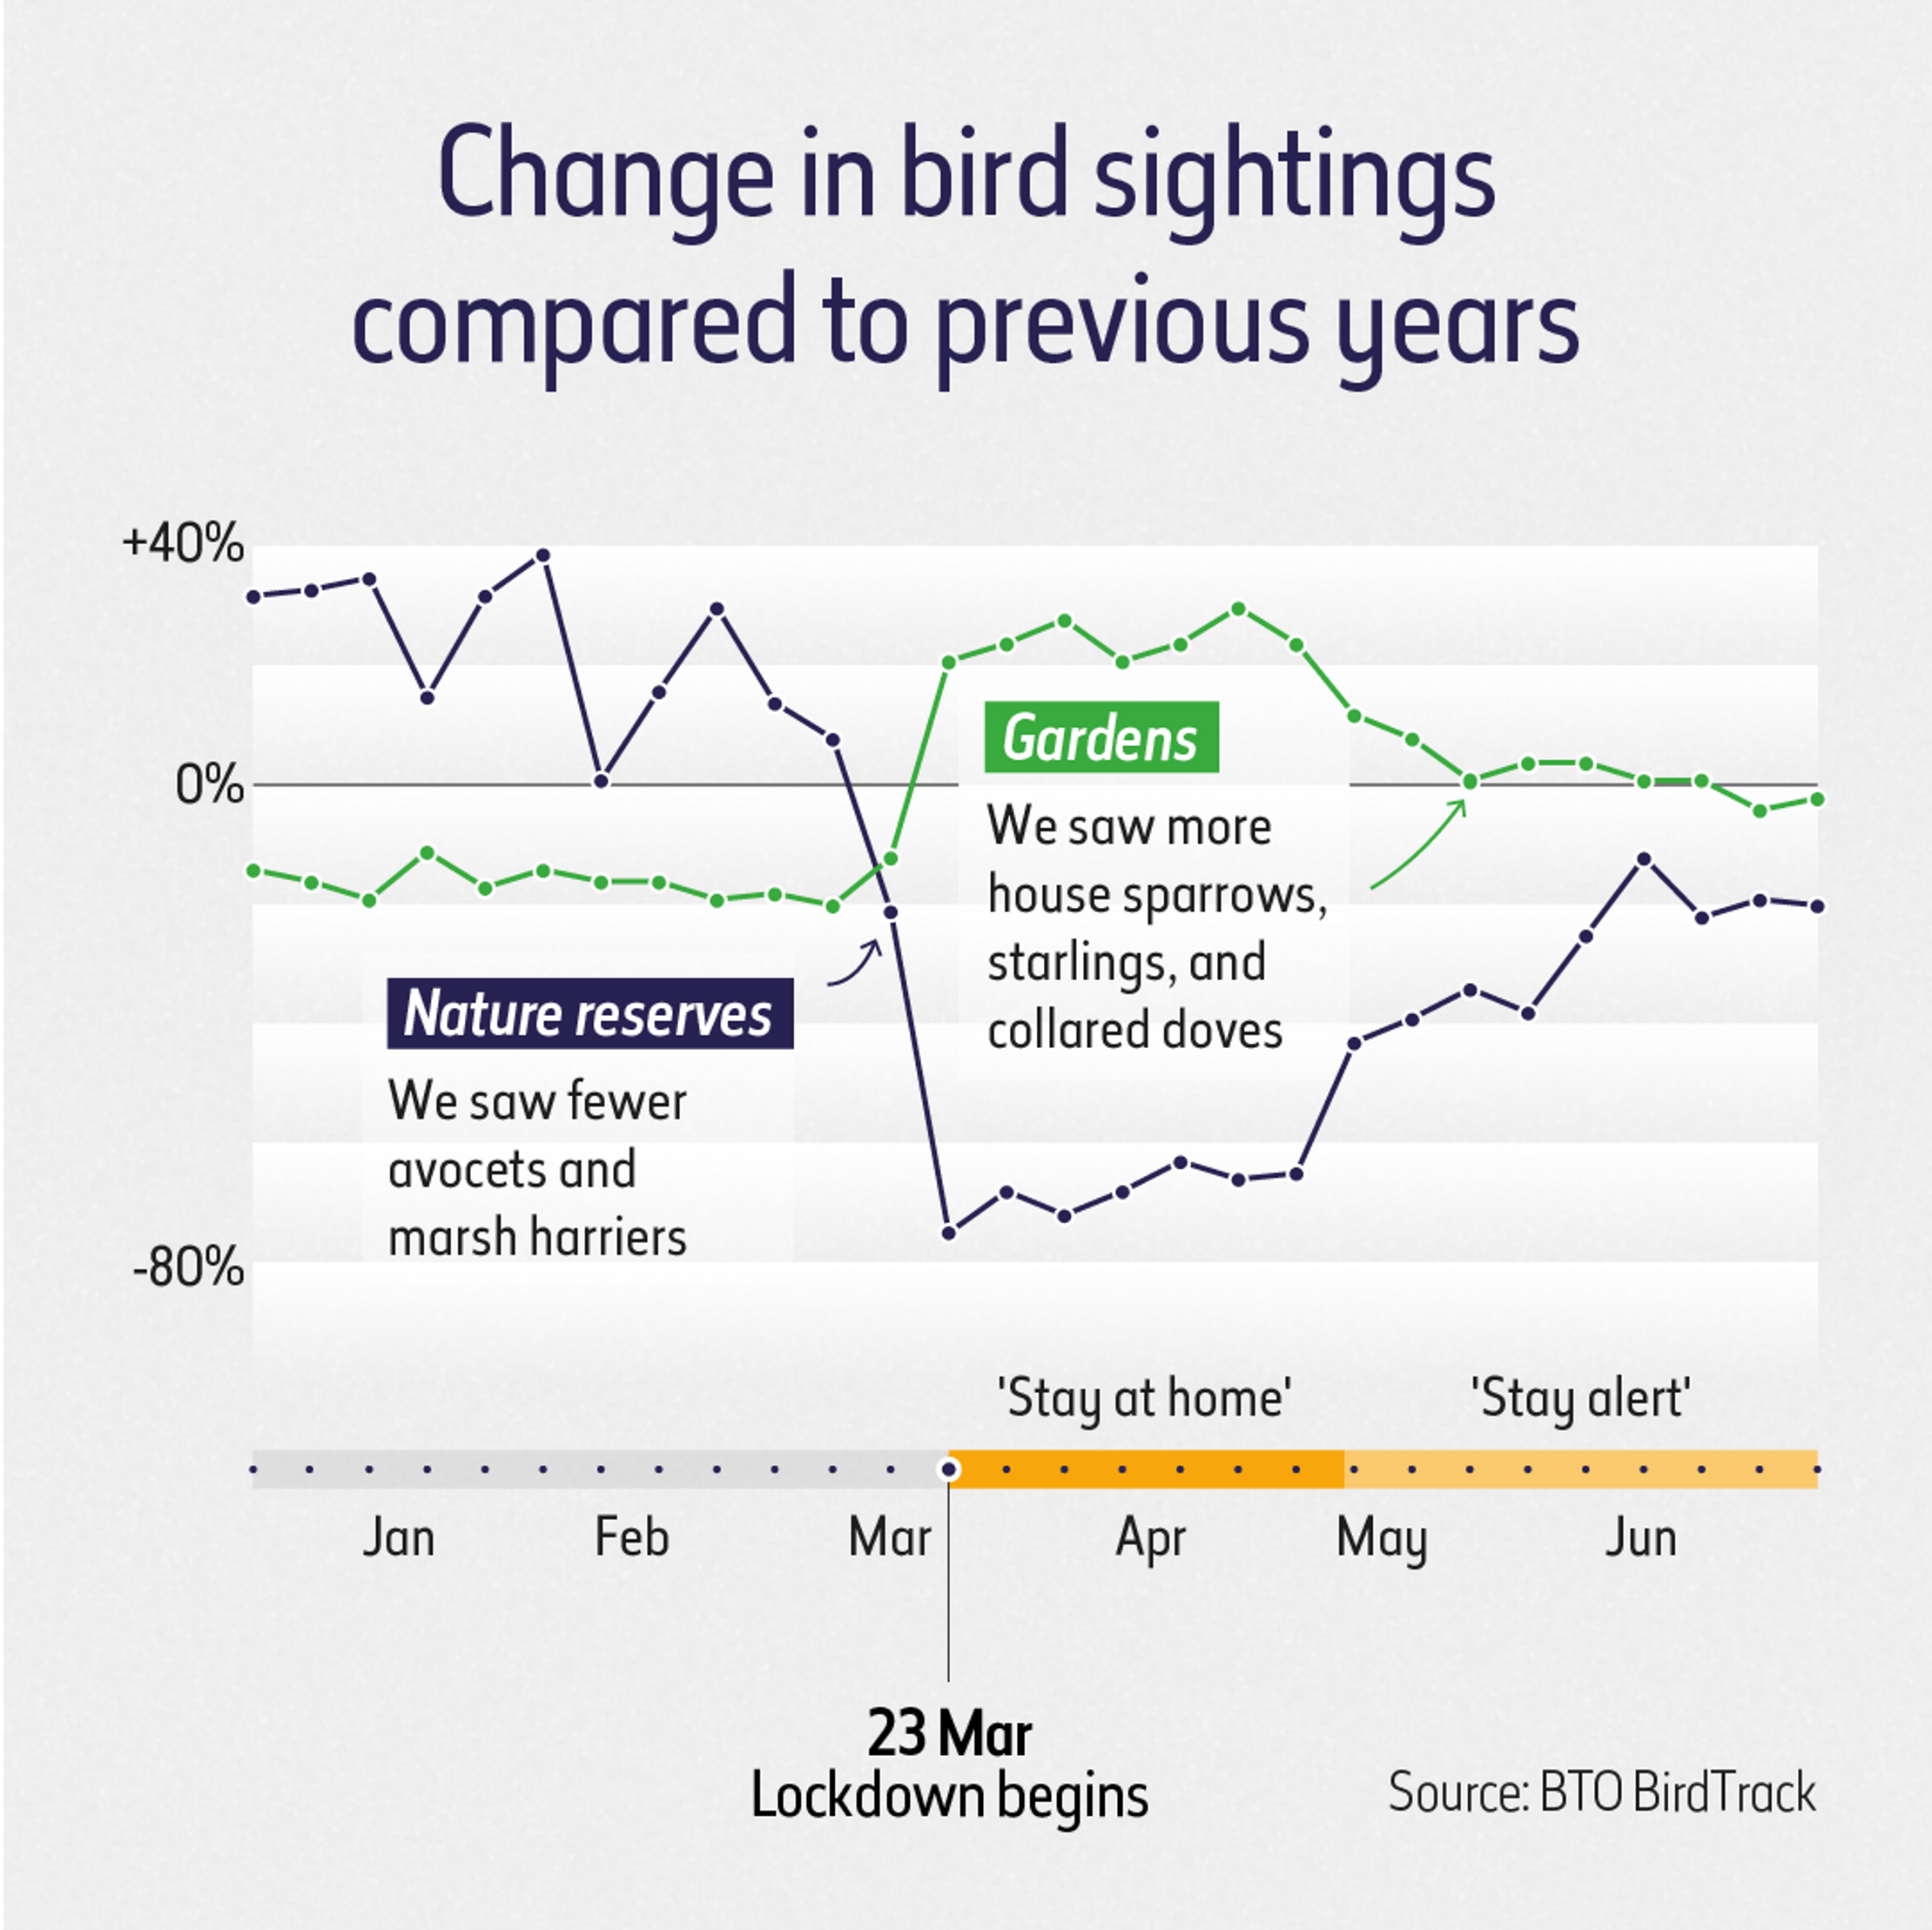 A line chart showing how bird sightings changed in 2020. It shows sightings on nature reserves fell as lockdown began and garden recordings for birds like sparrows and starlings increased.